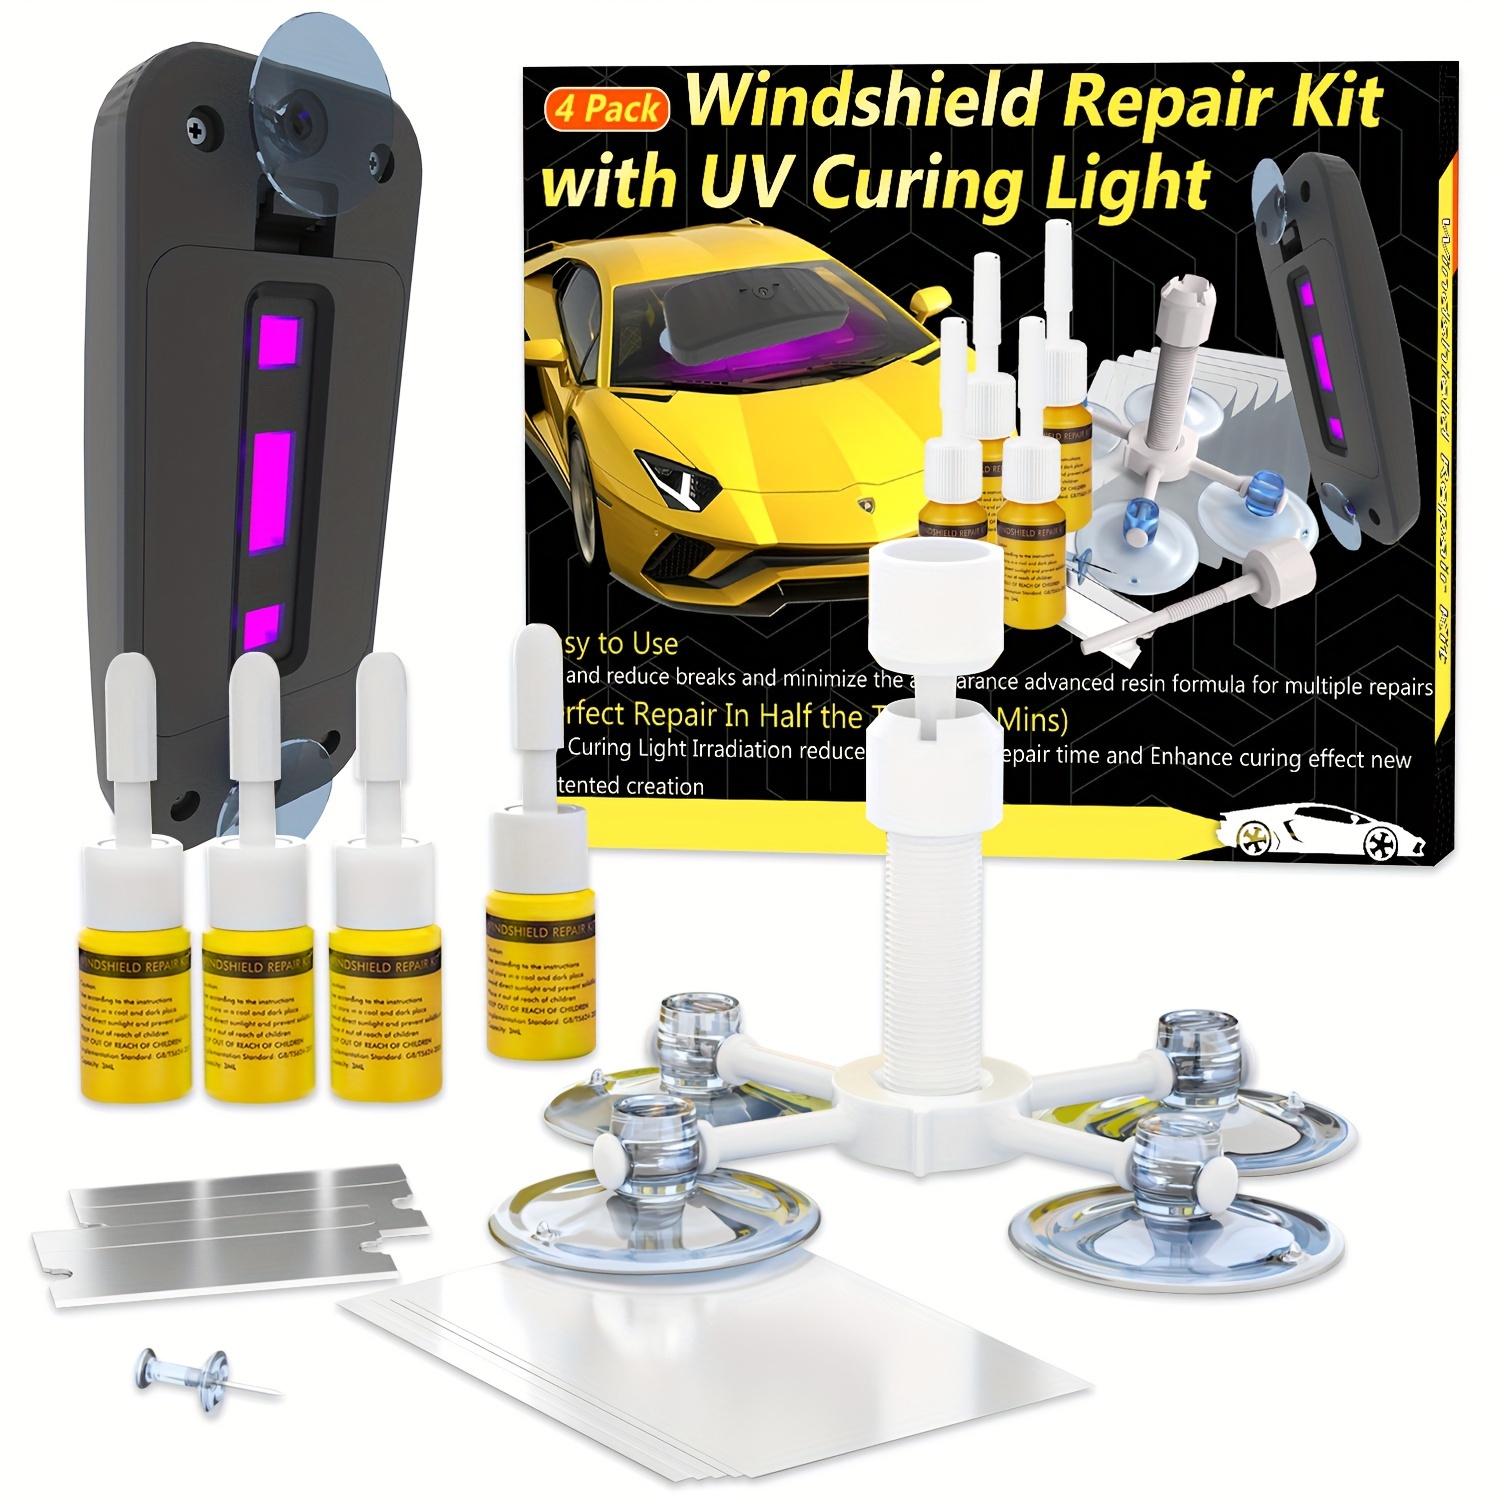 

Windshield Repair Kit, Windshield Crack Repair For Chips And Cracks, Glass Repair Fluid With Pressure Syringes, Car Windshield Chip Repair Kit Quick Fix For Chips, Cracks, Star-shaped Crack